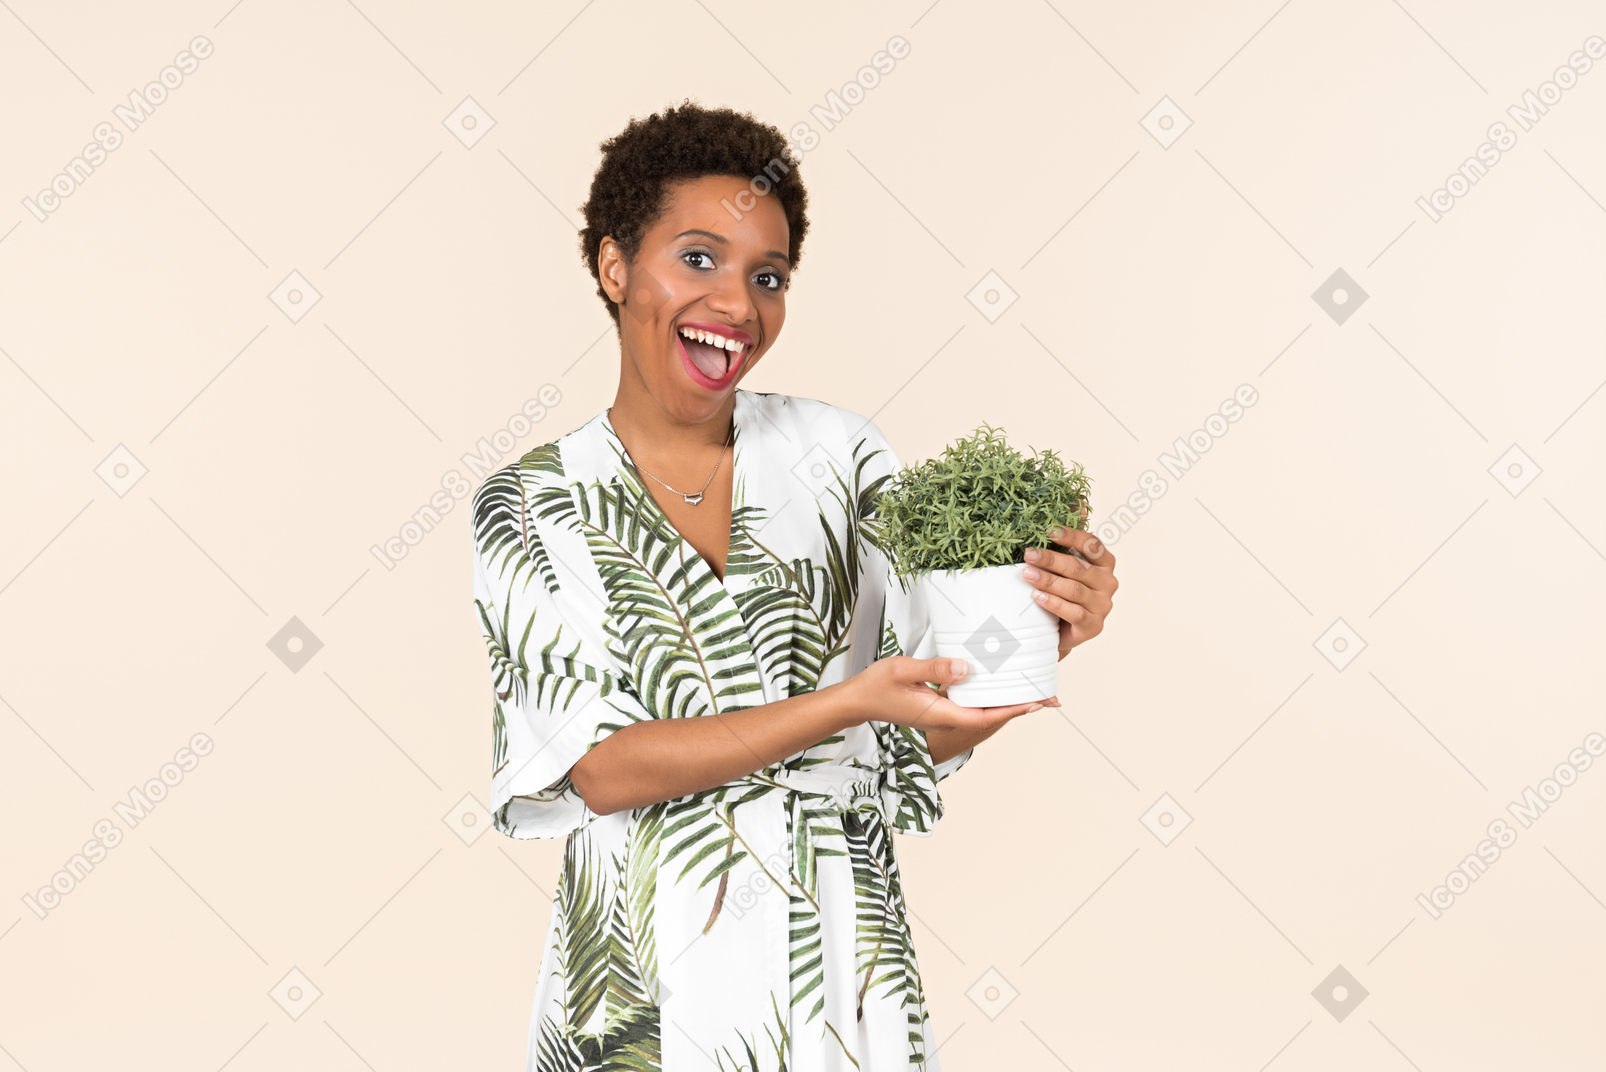 Young black short haired woman in a dressing gown, holding a potted plant